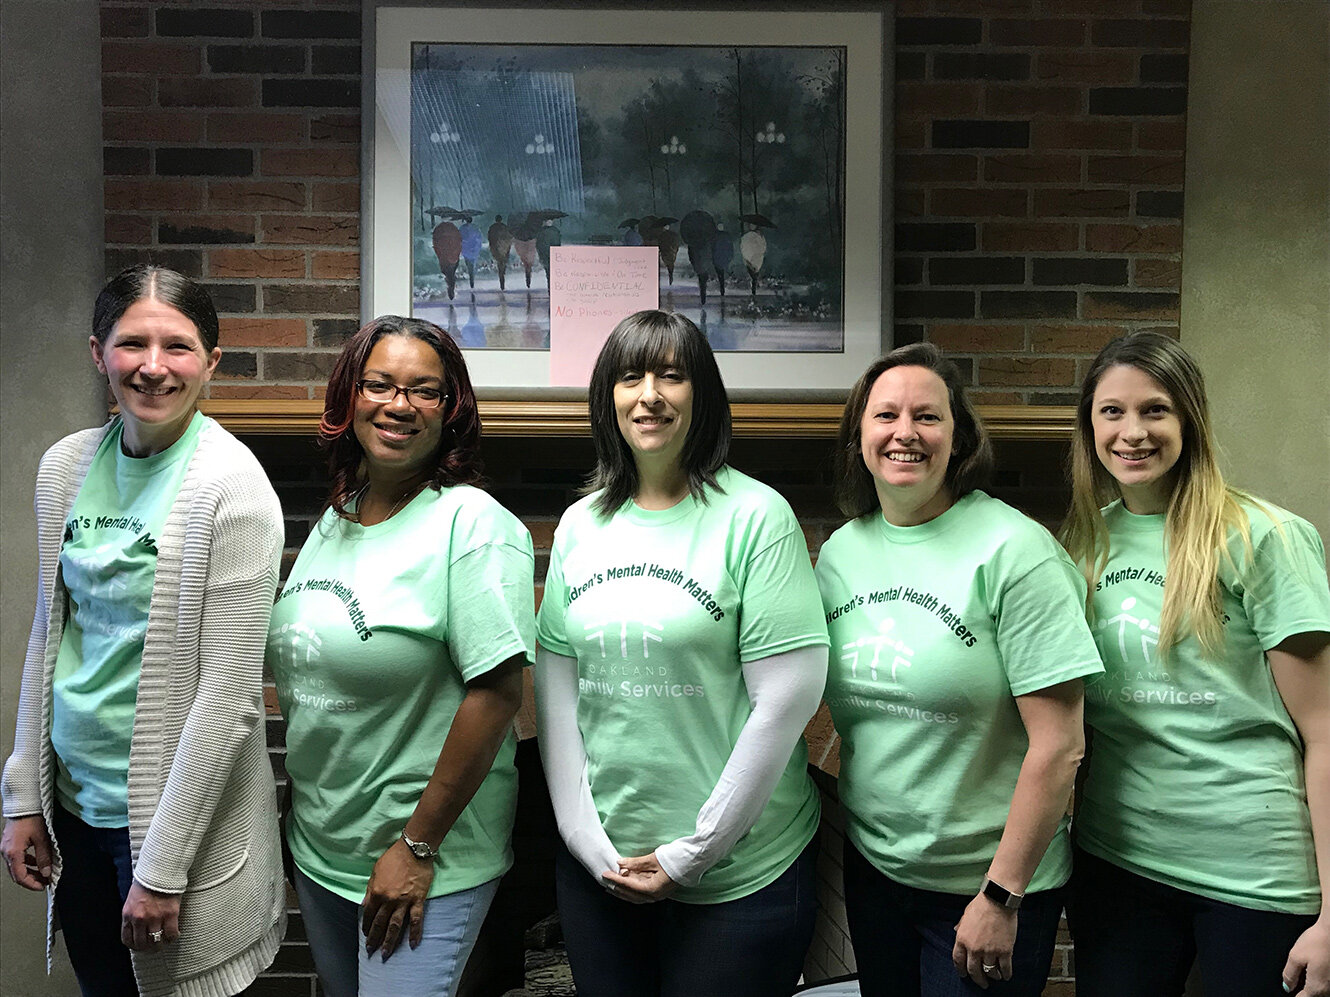  Staff celebrate Children’s Mental Health Awareness Day in 2019 at Oakland Family Services’ former Rochester office. 